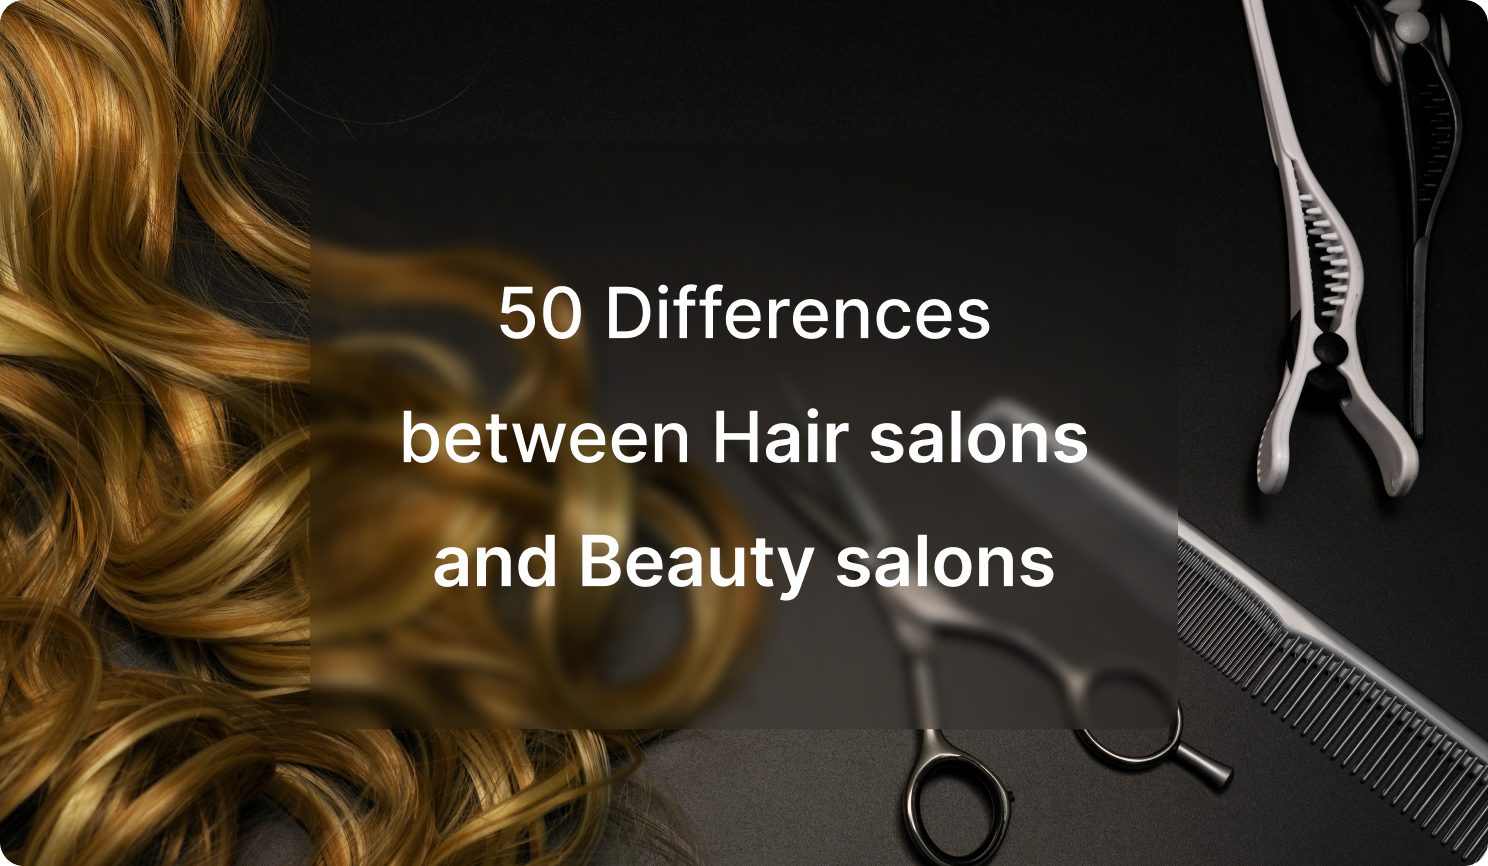 50 differences between hair salons and beauty salons